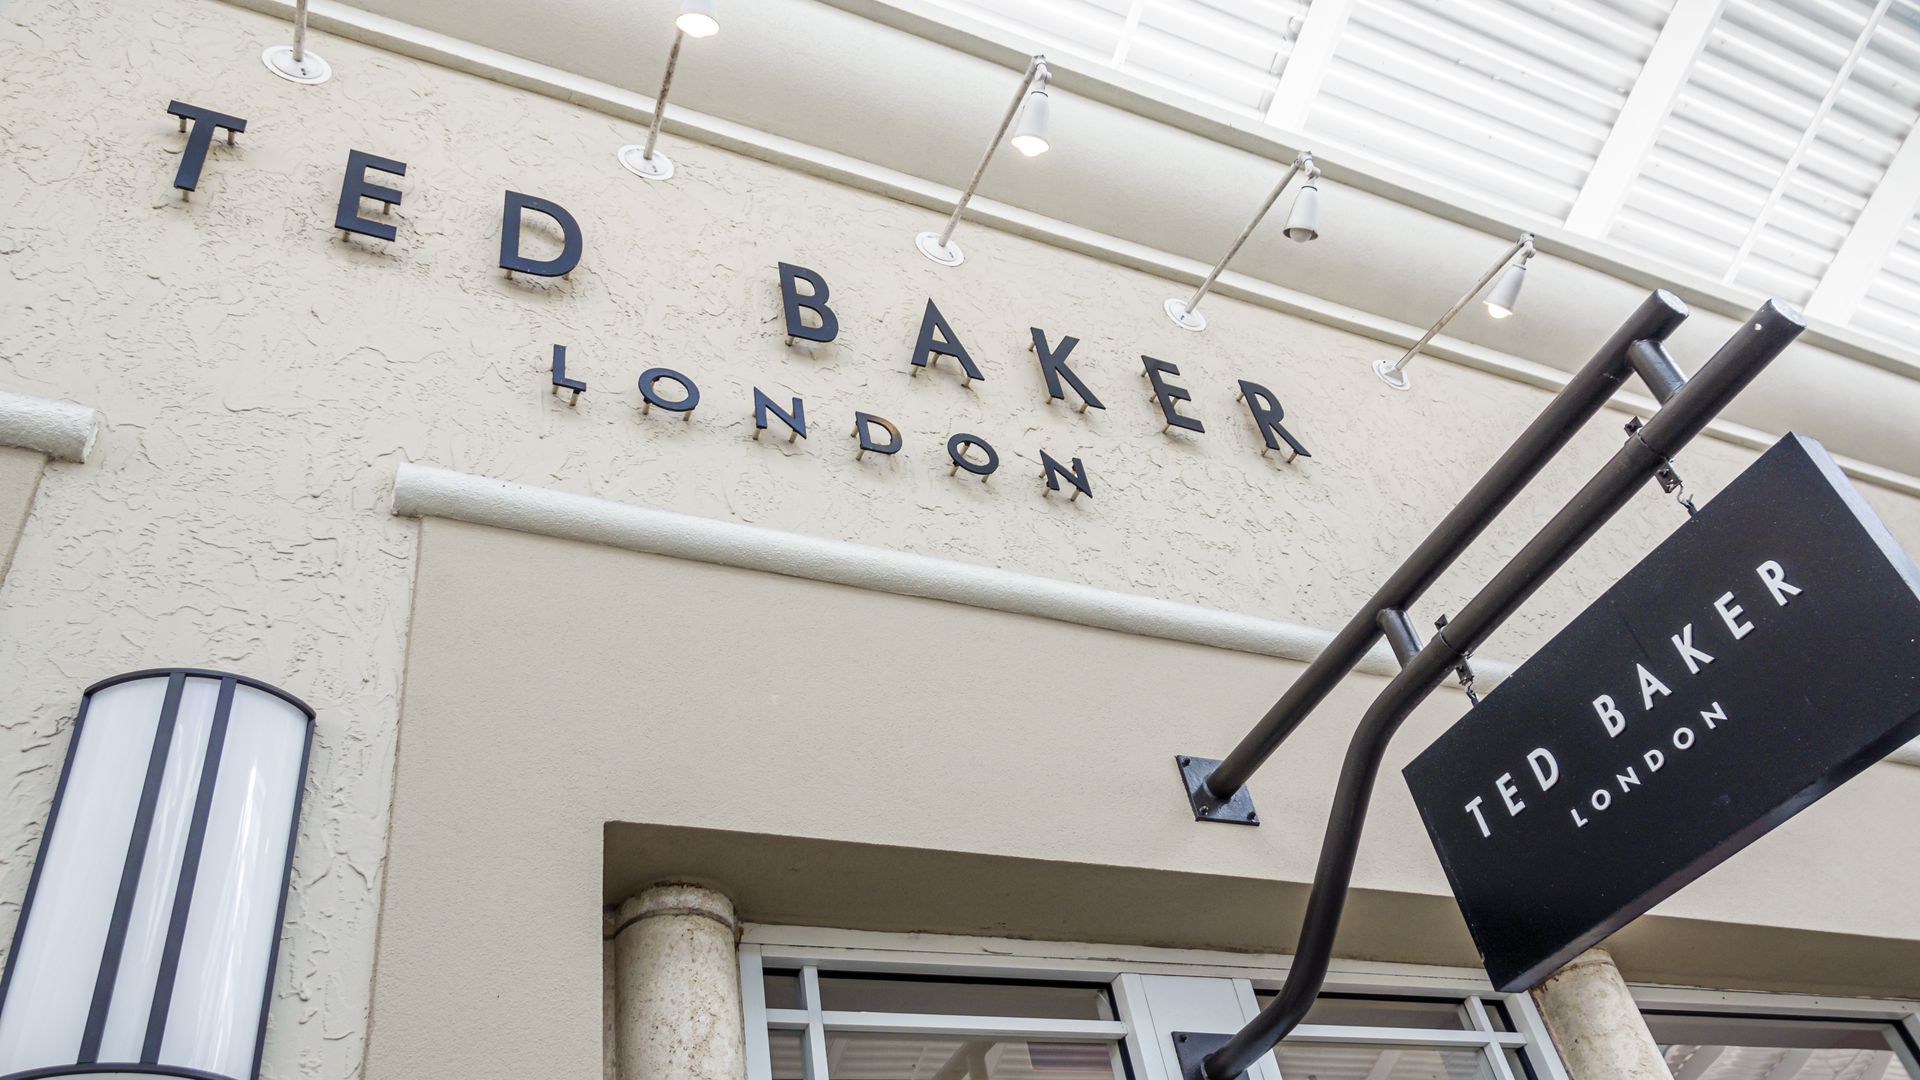 The Ted Baker banner is spelled out above a store entrance in black lettering. 